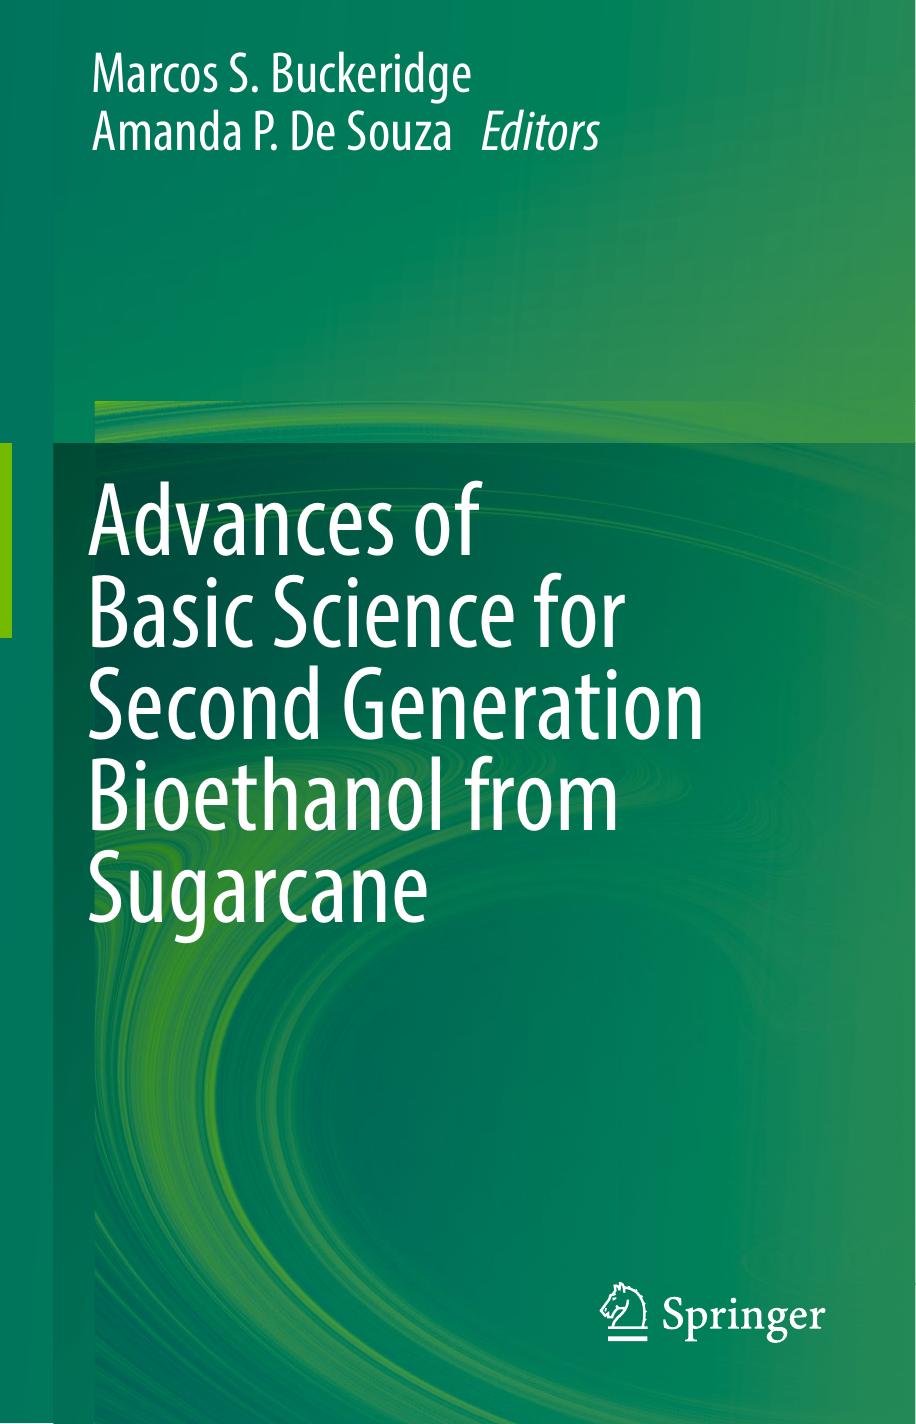 Advances of Basic Science for Second Generation Bioethanol from Sugarcane ( PDFDrive )